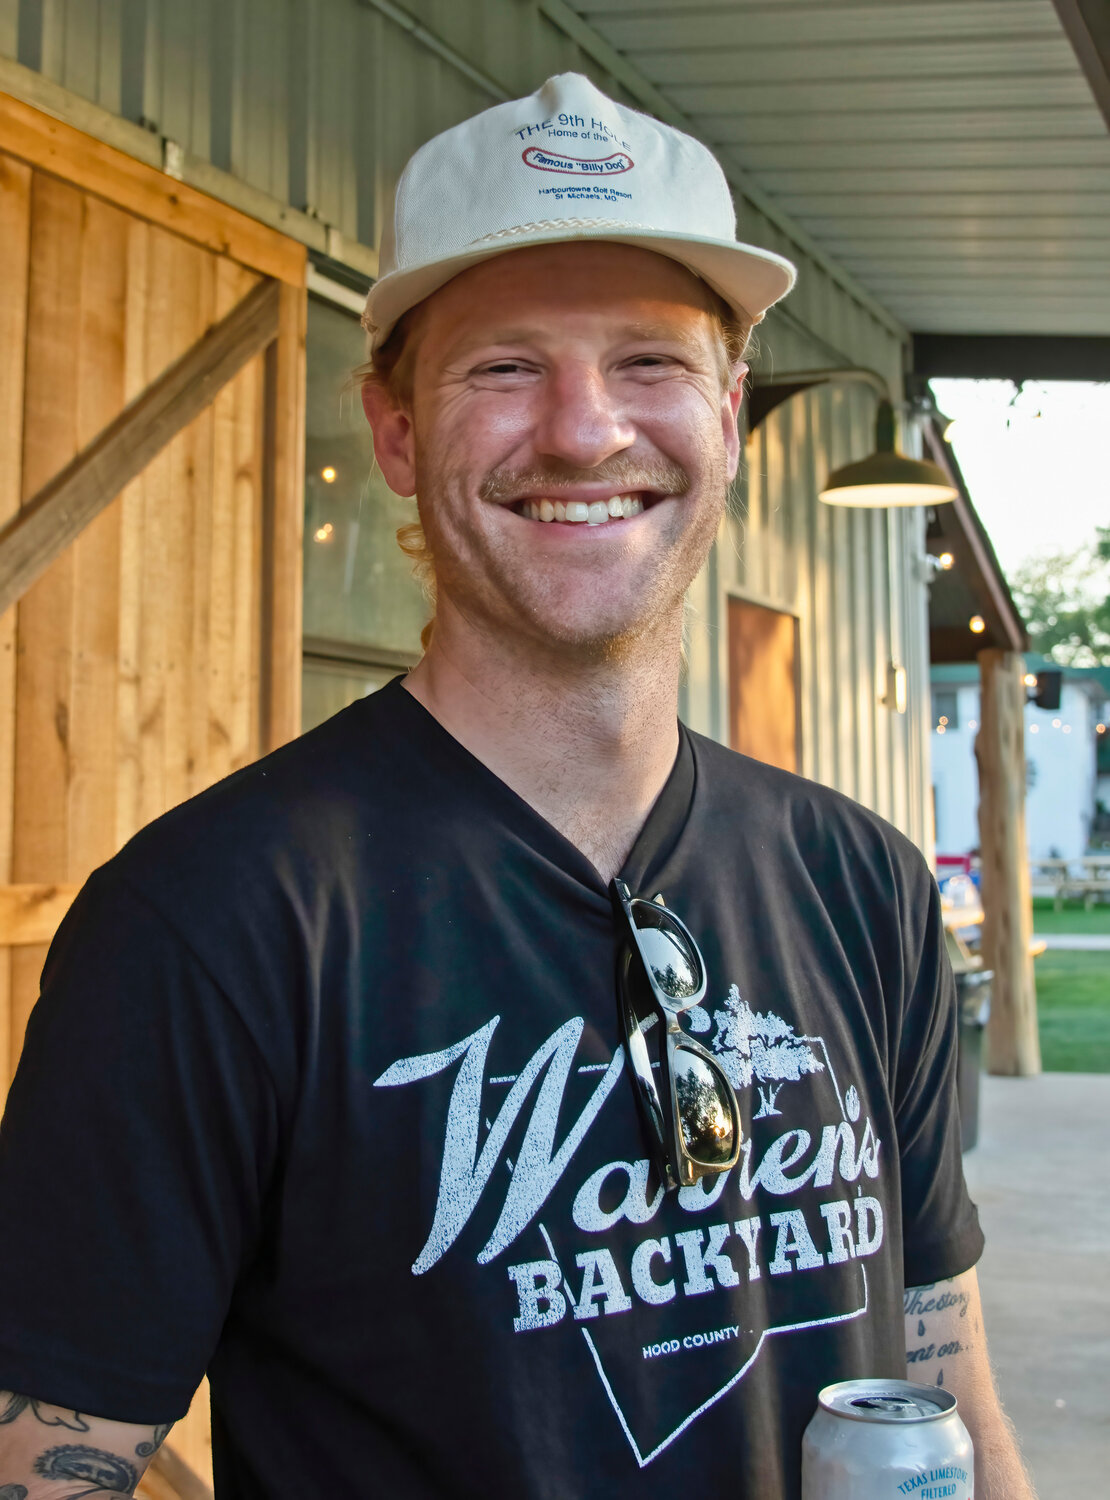 TRUSTED FRIEND: Jeremy Newberry, Brett Berry's friend since fourth grade, manages day-to-day operations at the new Warren's Backyard.